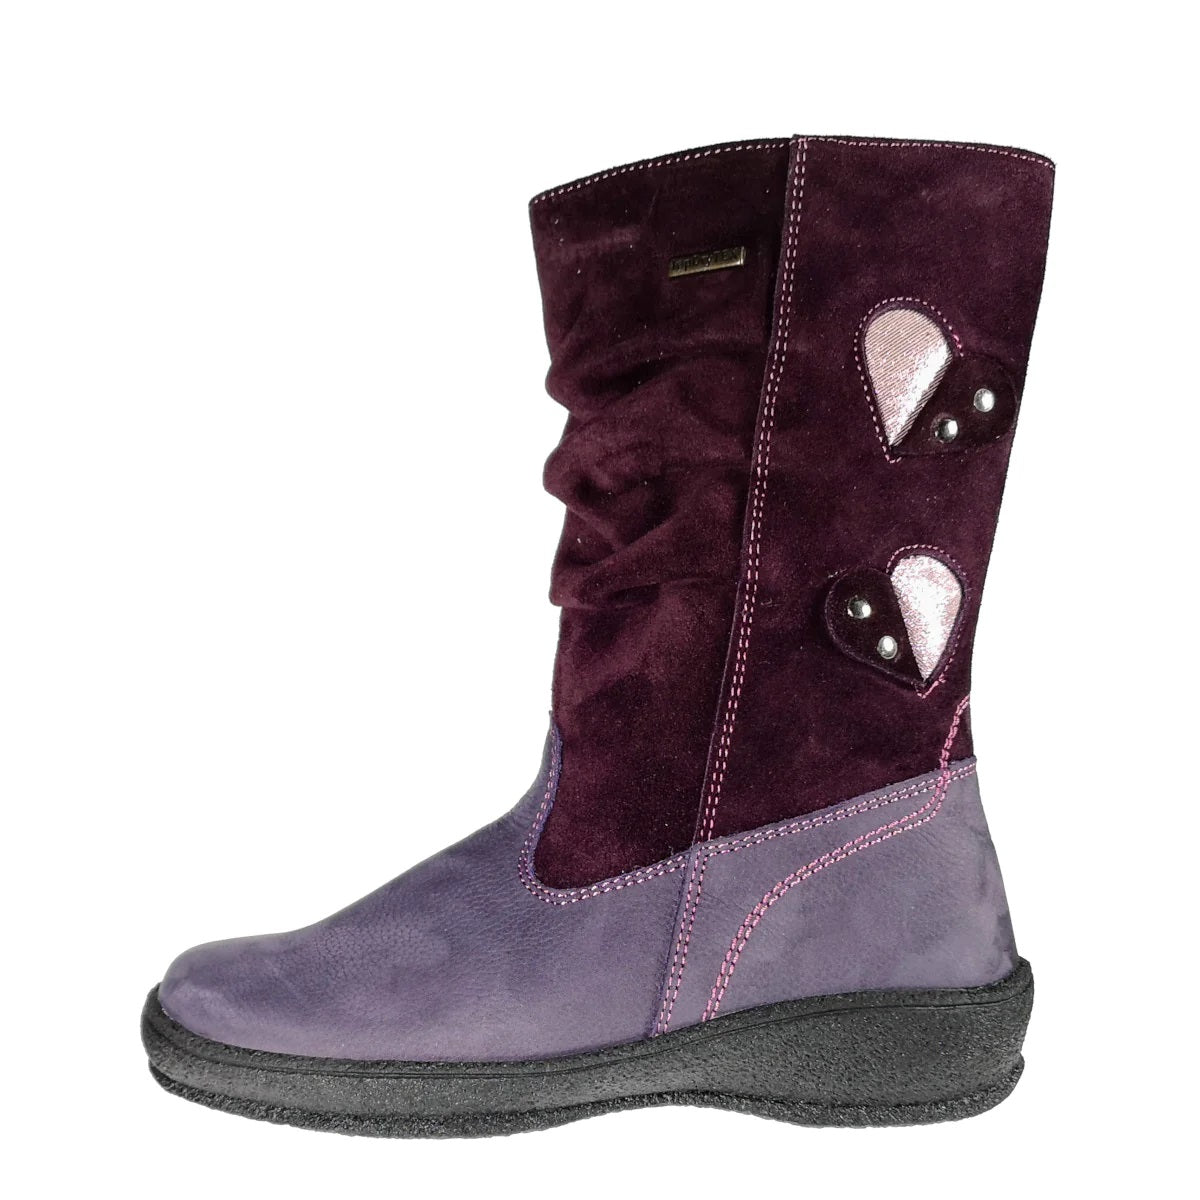 Premium quality winter boots made from 100% genuine leather lining and upper mauve and purple with hearts and side zipper. This Szamos Kids product meets the highest expectations of healthy and comfortable kids shoes. The exceptional comfort these shoes provide assure the well-being and happiness of your child.